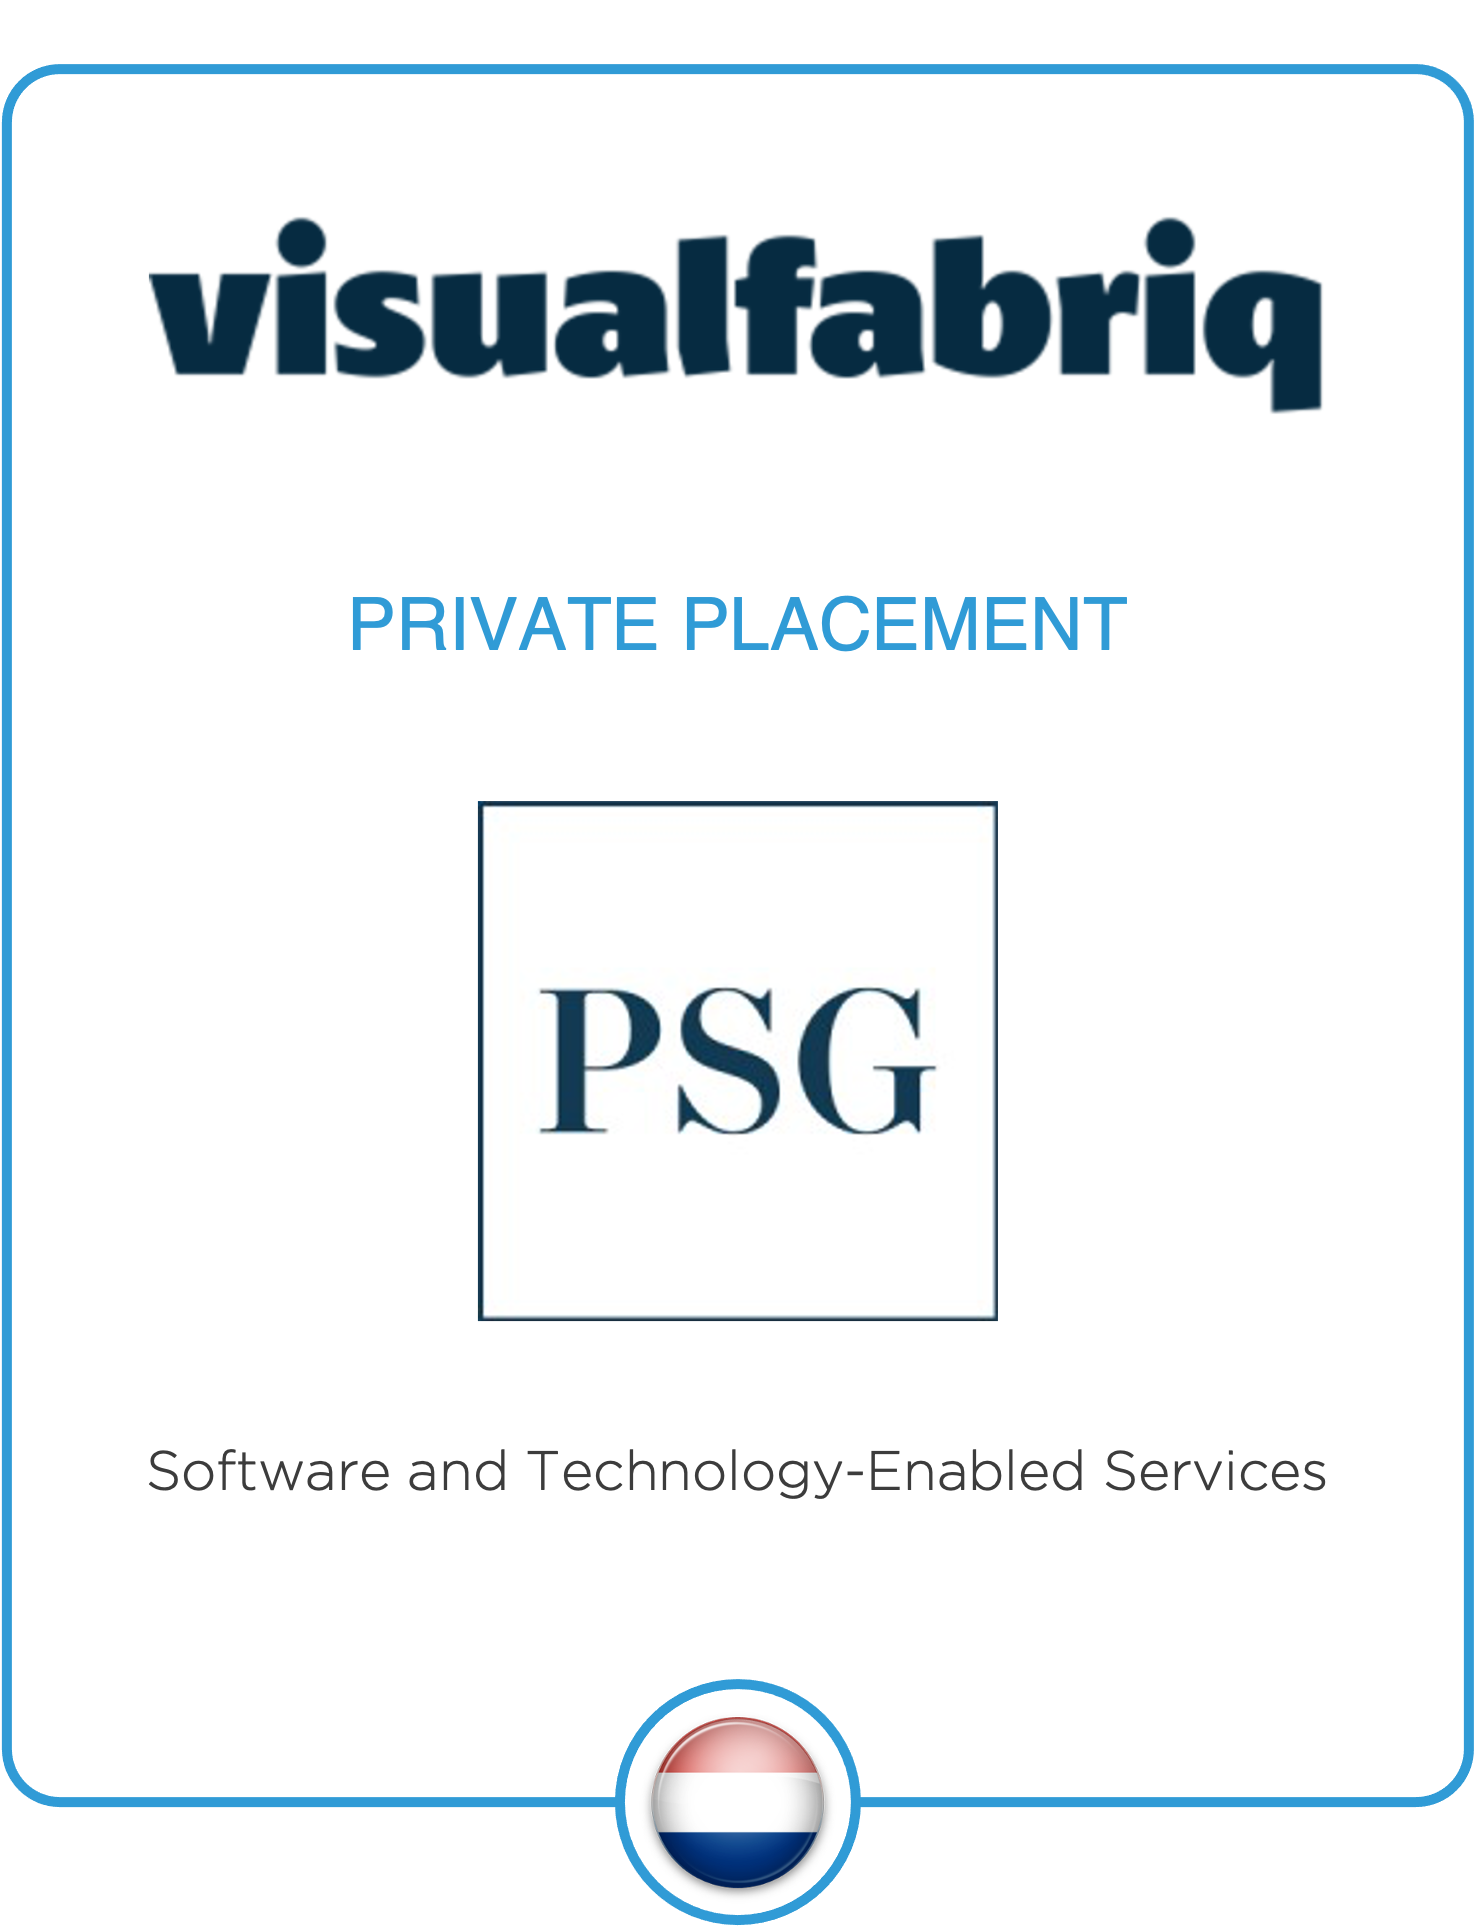 Drake Star Acts as an Exclusive Financial Advisor to Visualfabriq in the Growth Investment by PSG  